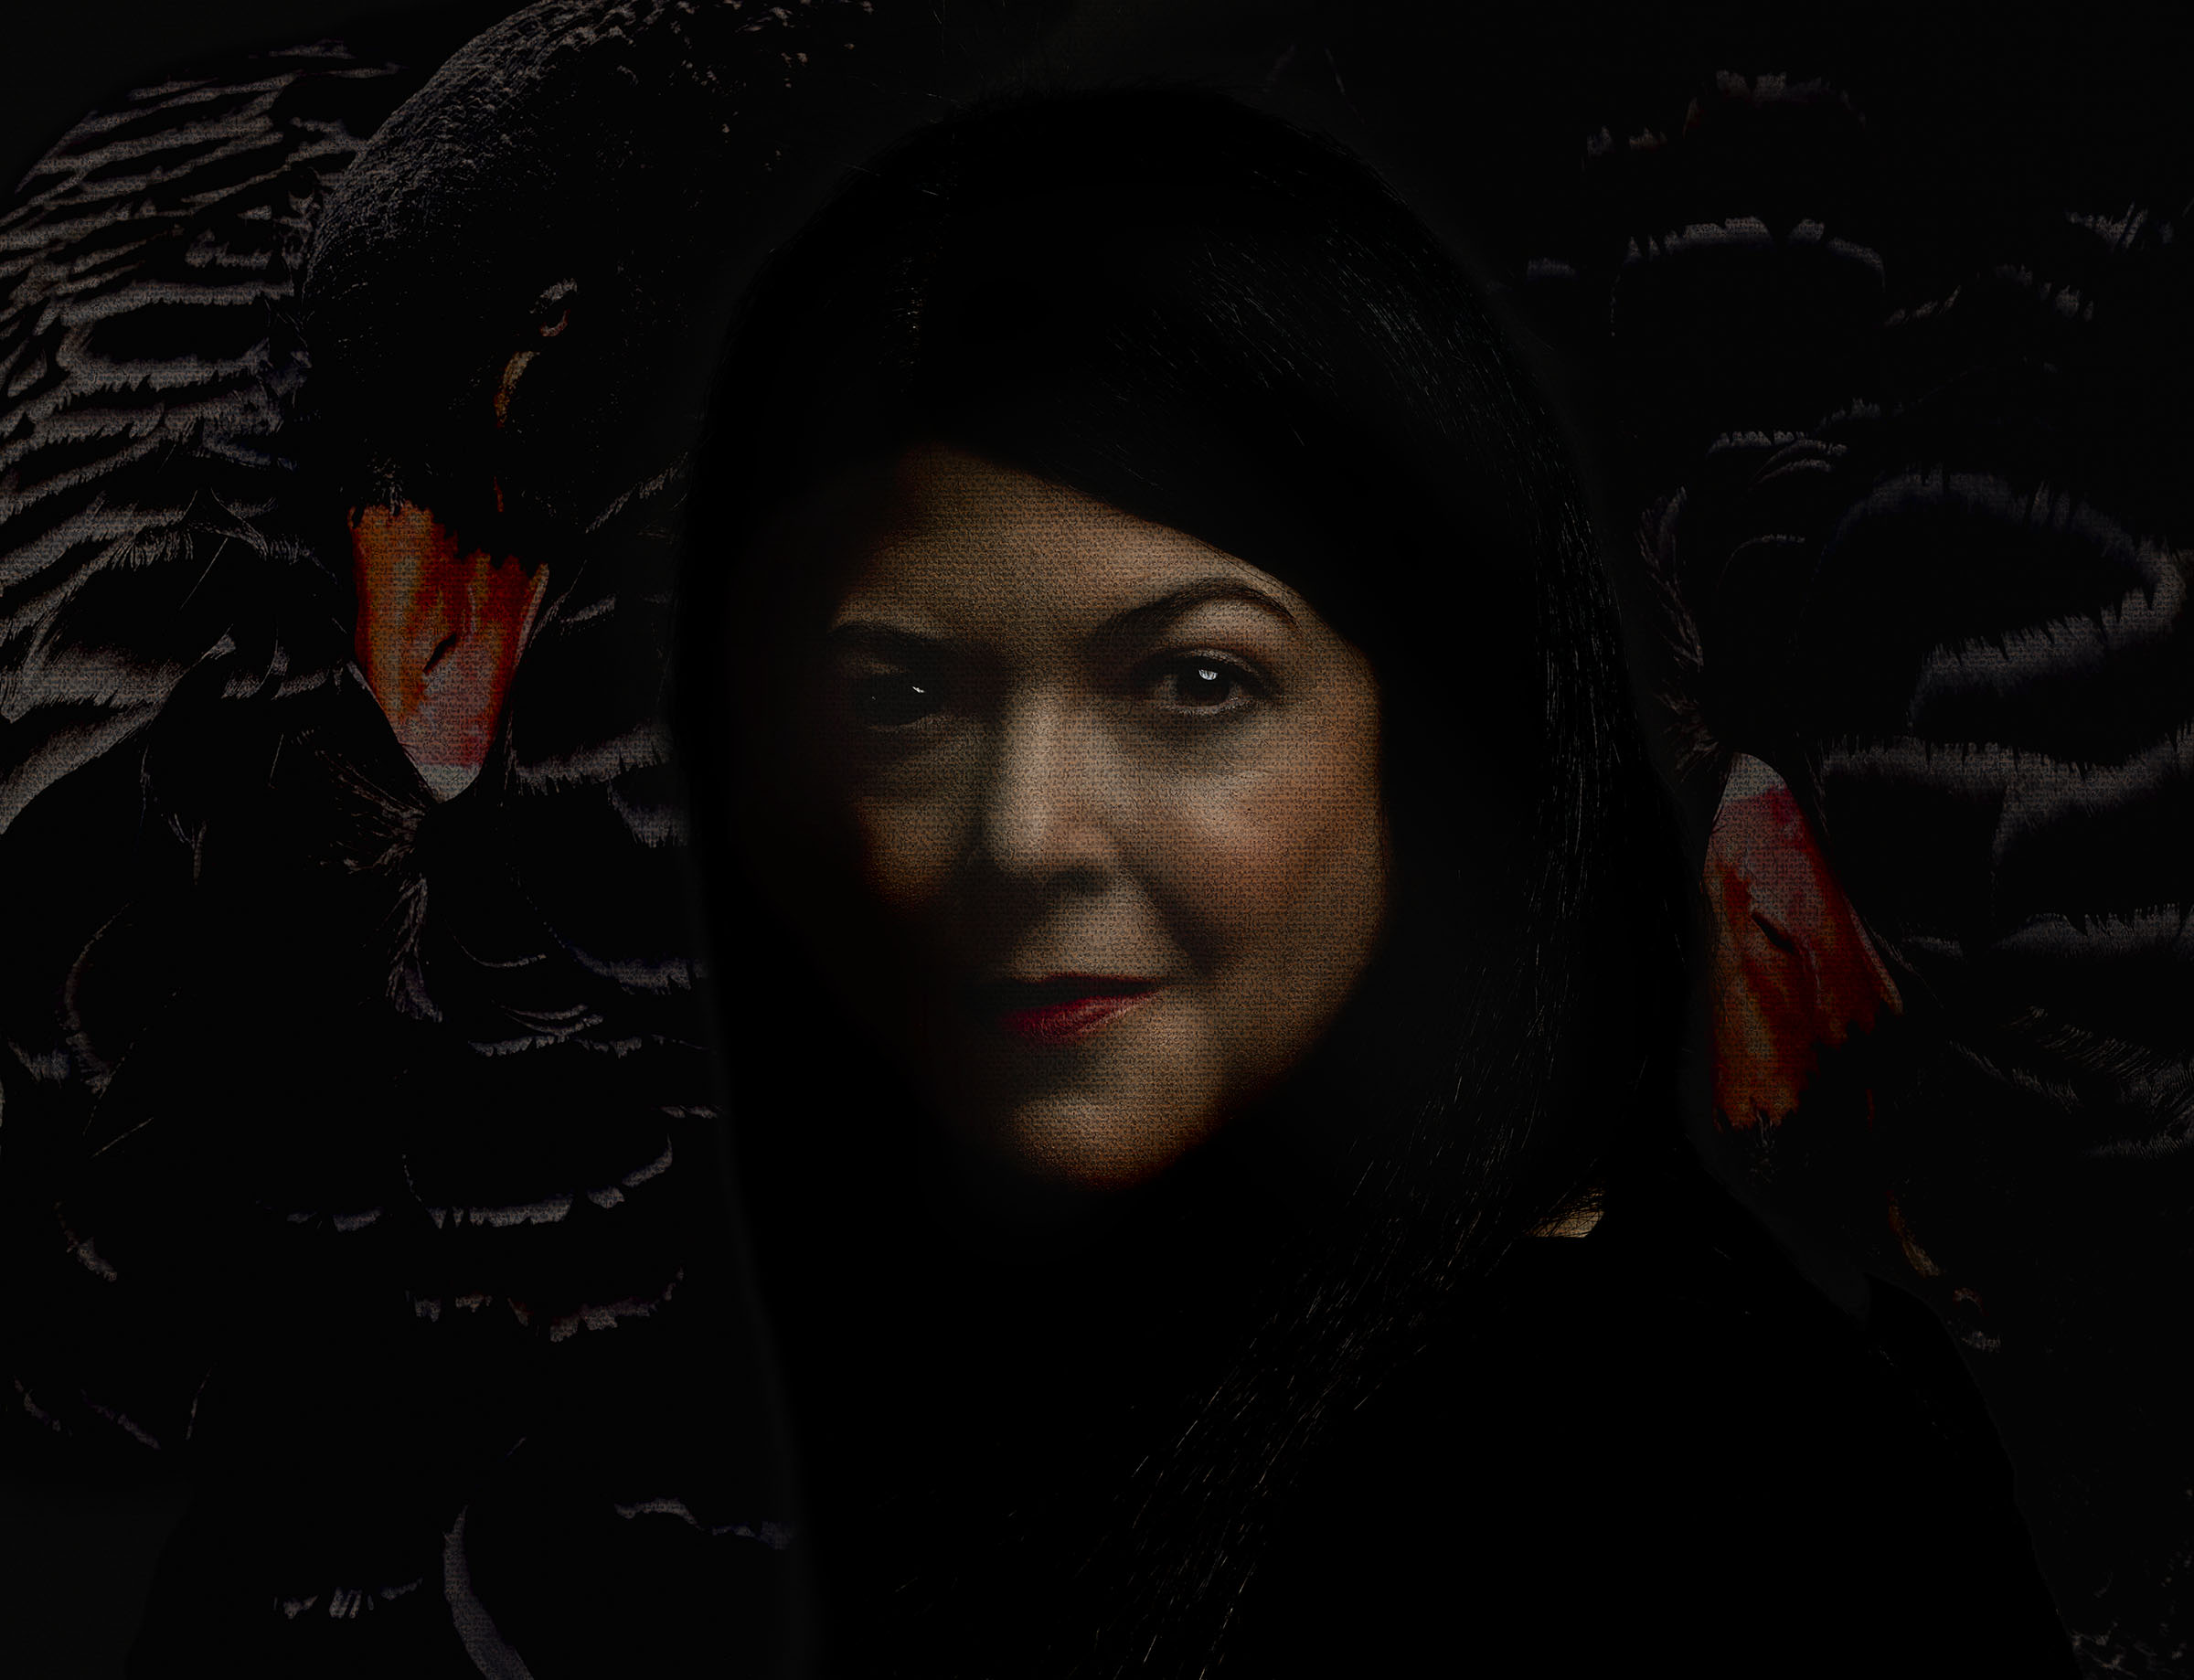 Ms Belle for Tess Steinkolk, Tess Client, Canvas Painting, Black swans, Caravaggio style, Wick Beavers NYC Portrait Photographer